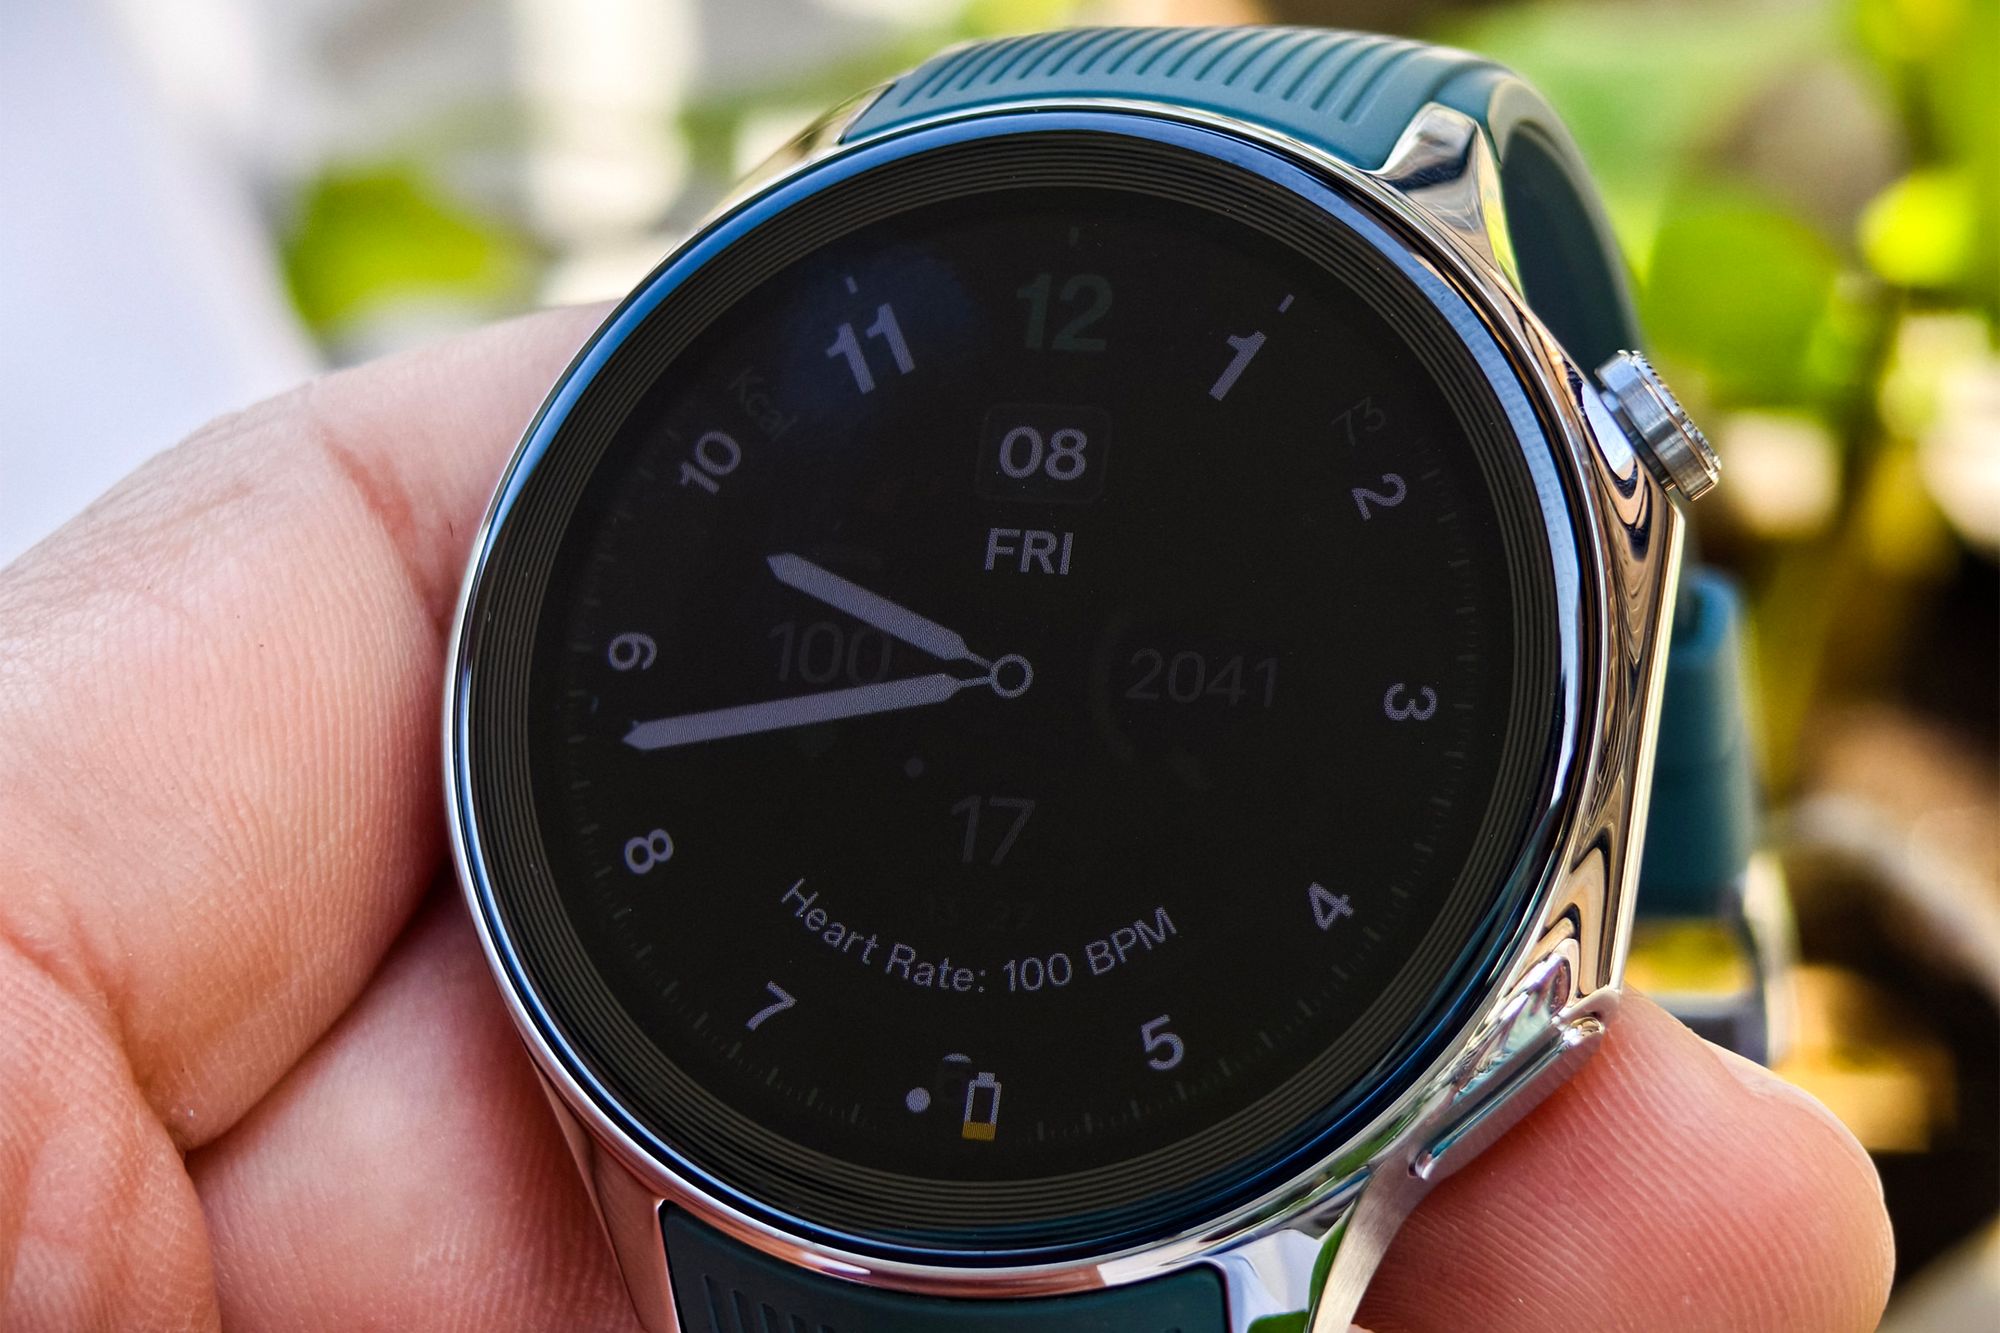 Always-on Display on the OnePlus Watch 2